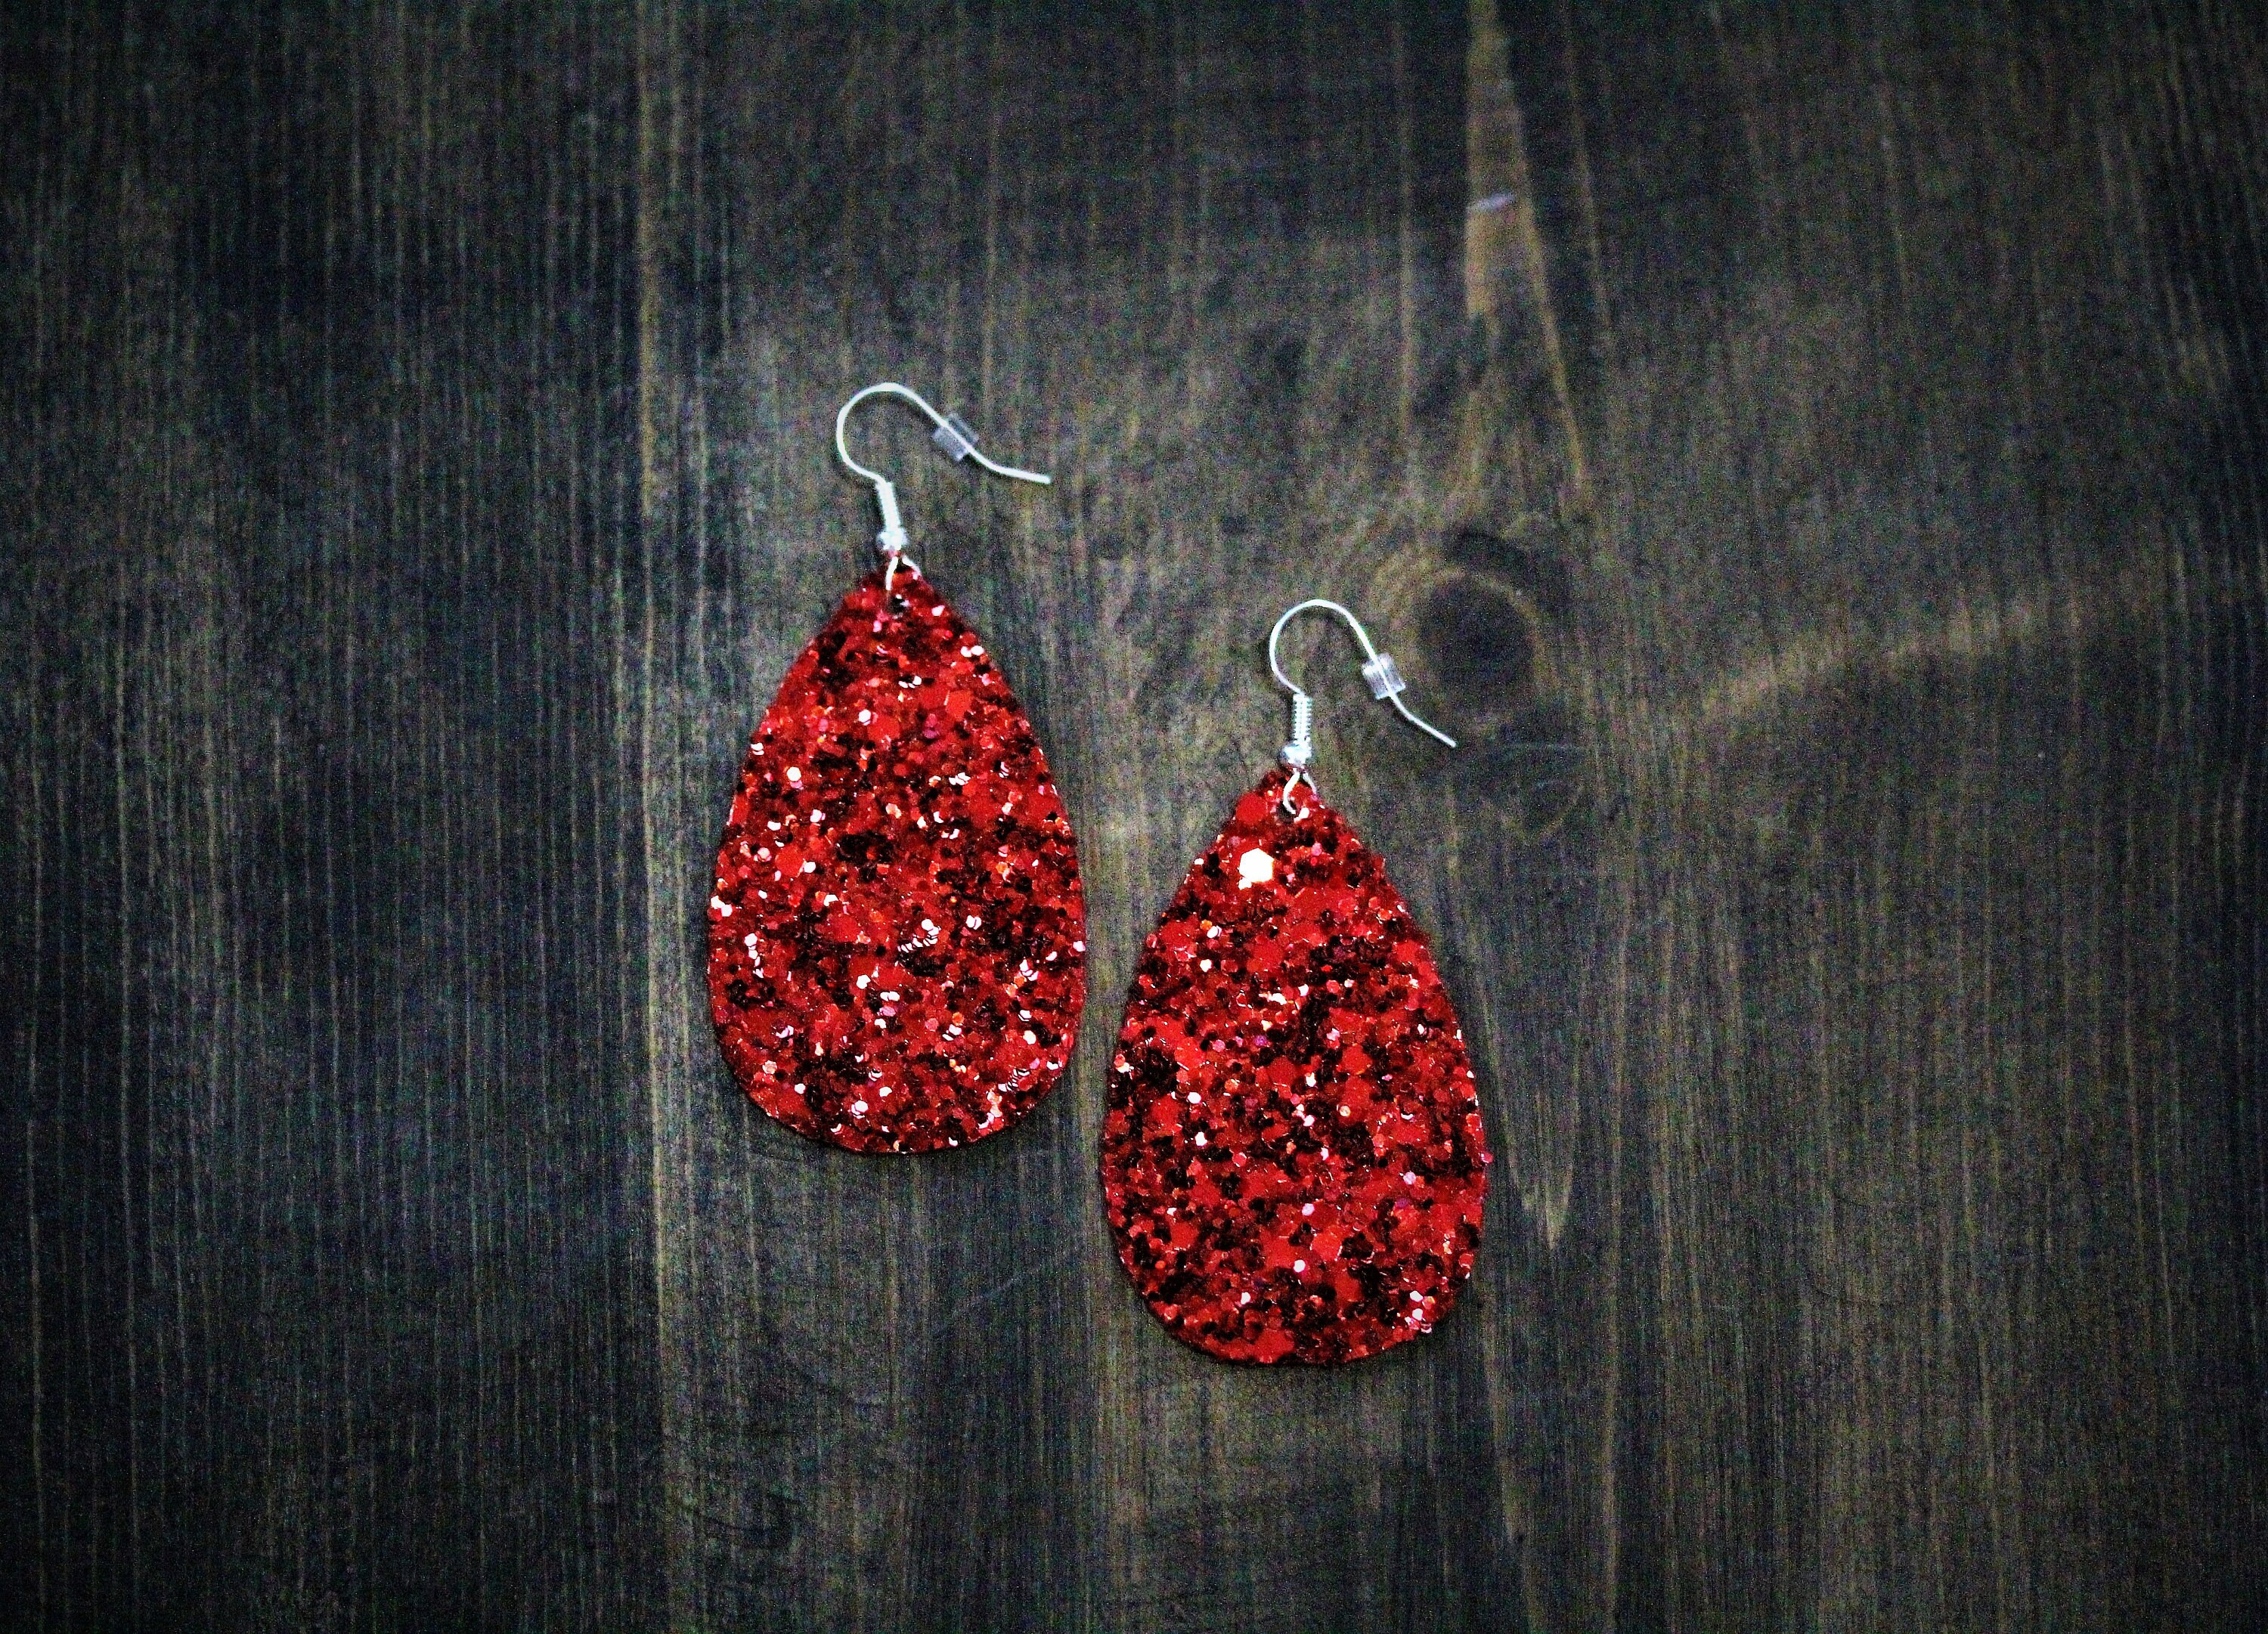 Faux Leather Earrings Small 1.75” 2” Star Shaped Red Glitter Shiny